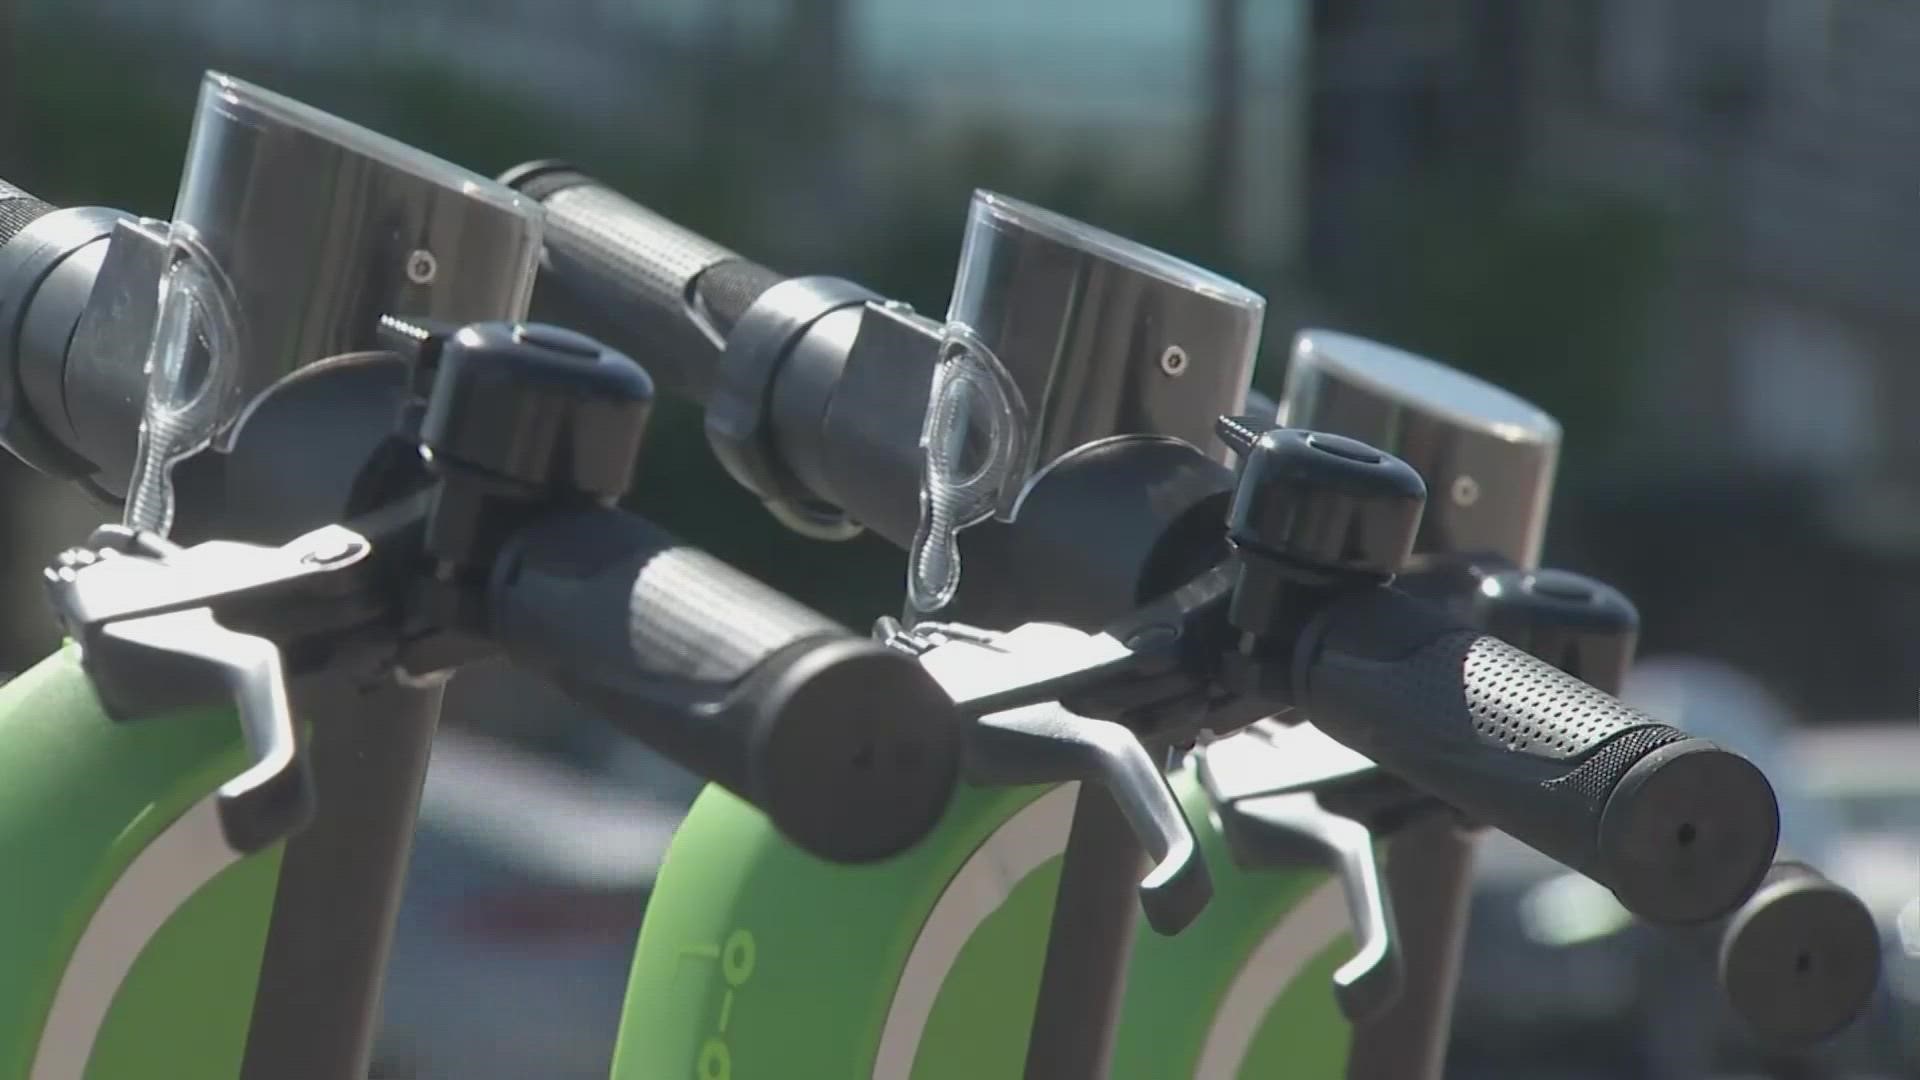 Envision Dallas, which provides services for the visually impaired, asks riders to park rental bikes and scooters correctly so they won't be obstacles on sidewalks.